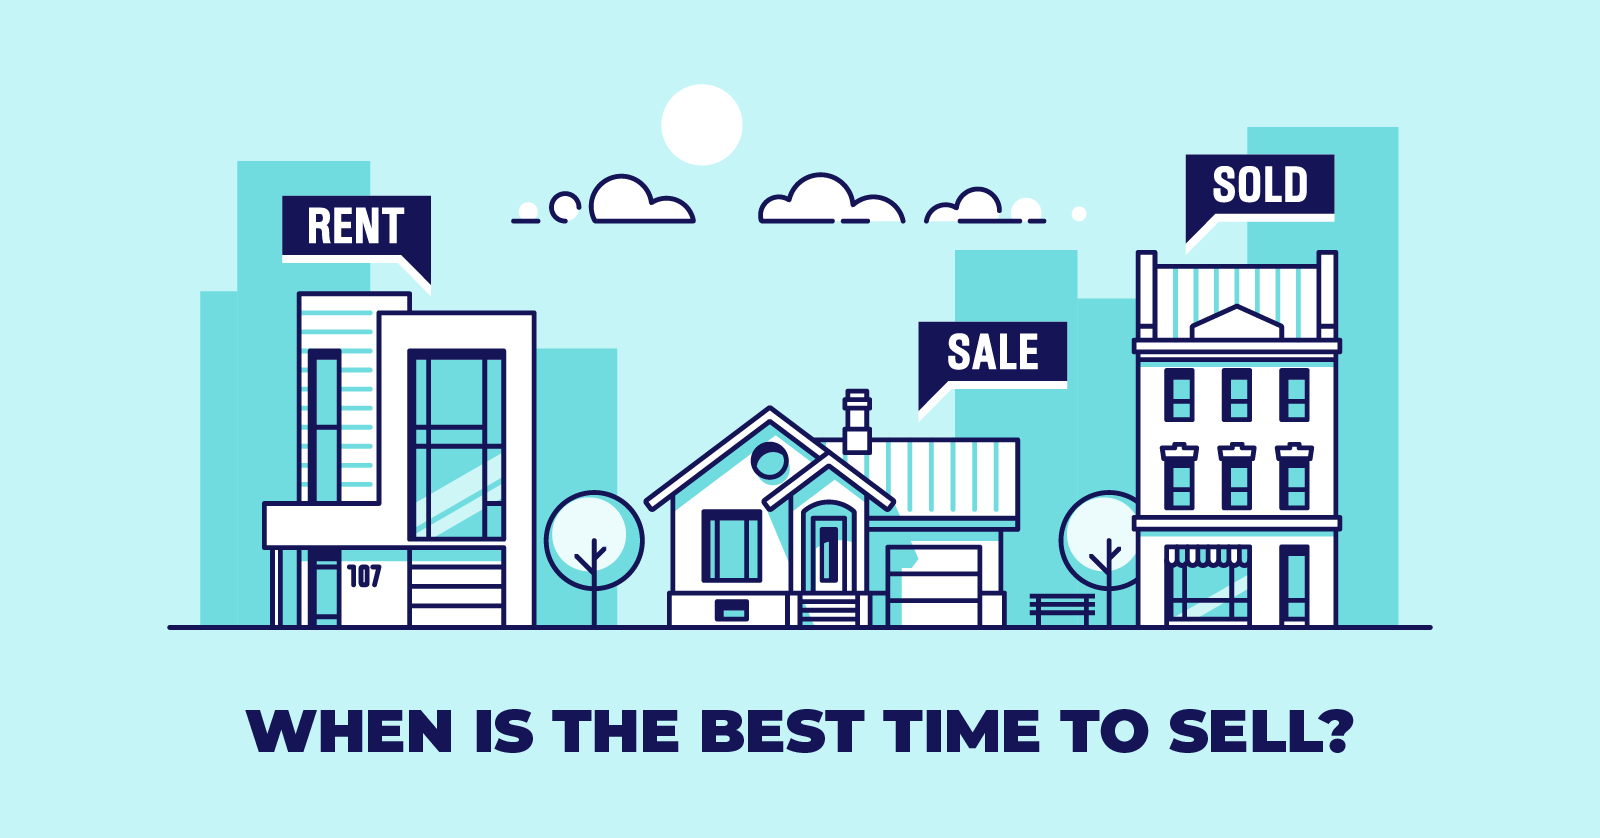 When is the best time to sell a house